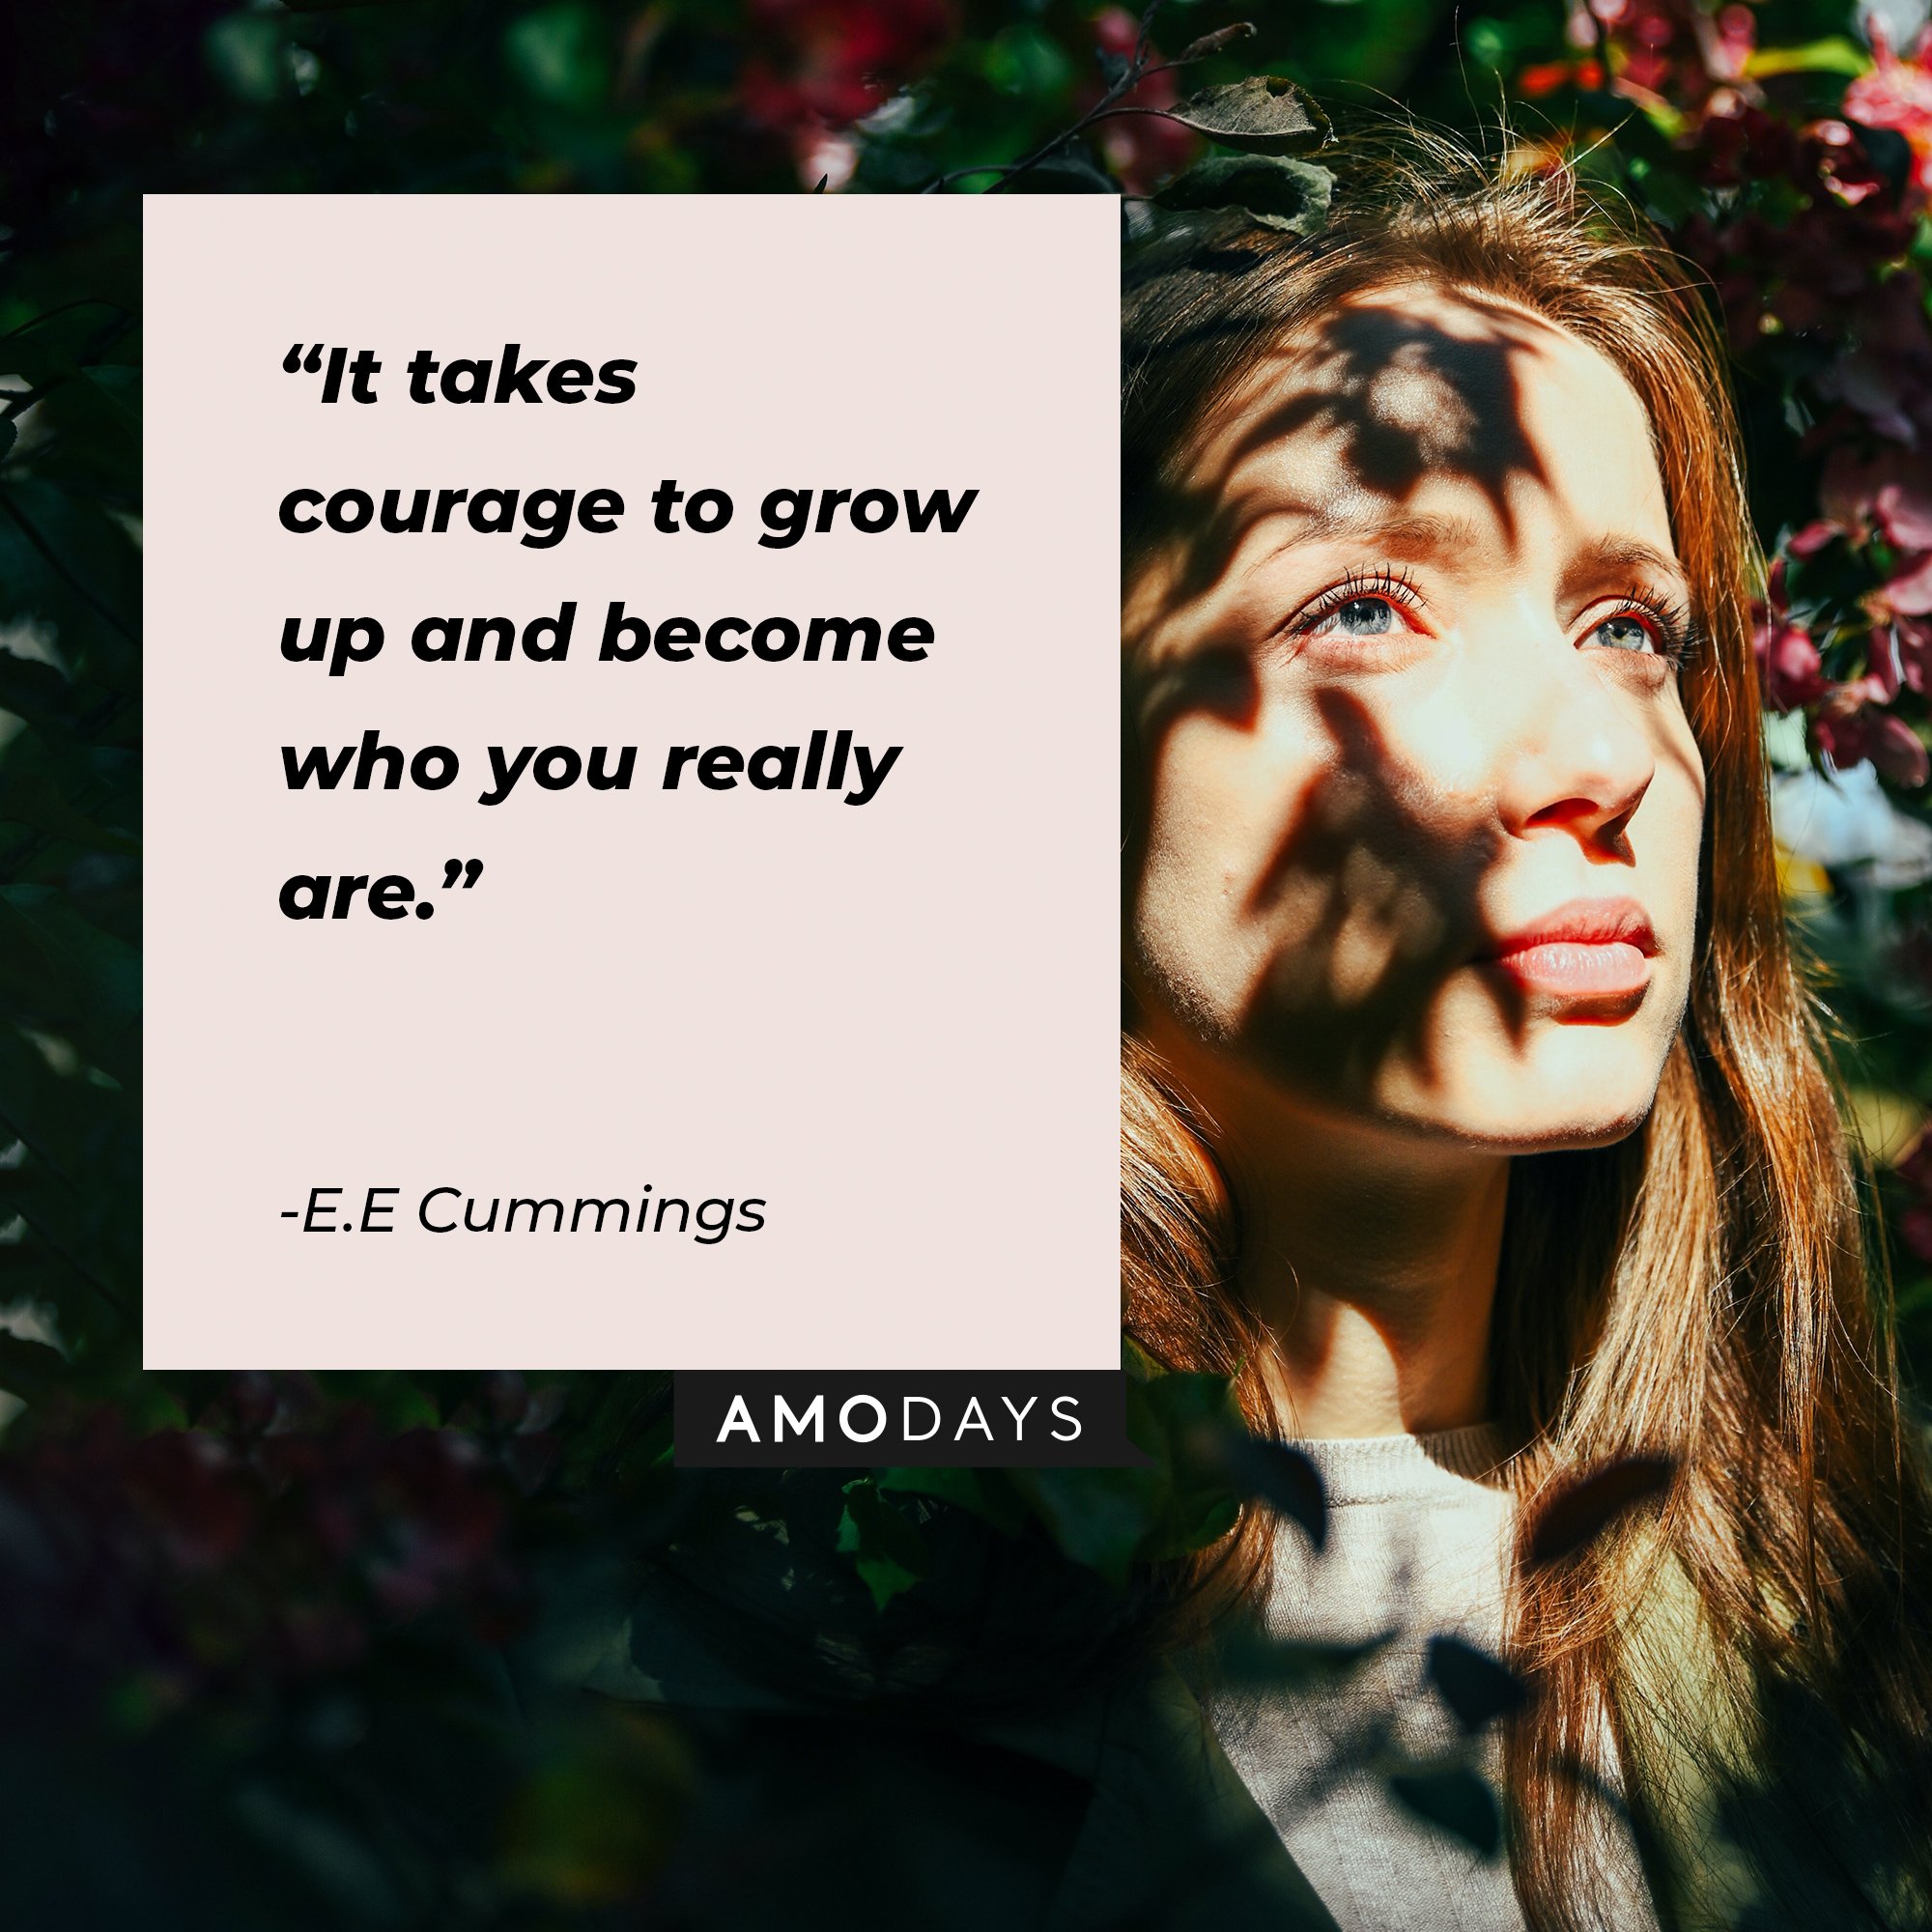 E.E Cummings's quote: “It takes courage to grow up and become who you really are.”  | Image: AmoDays